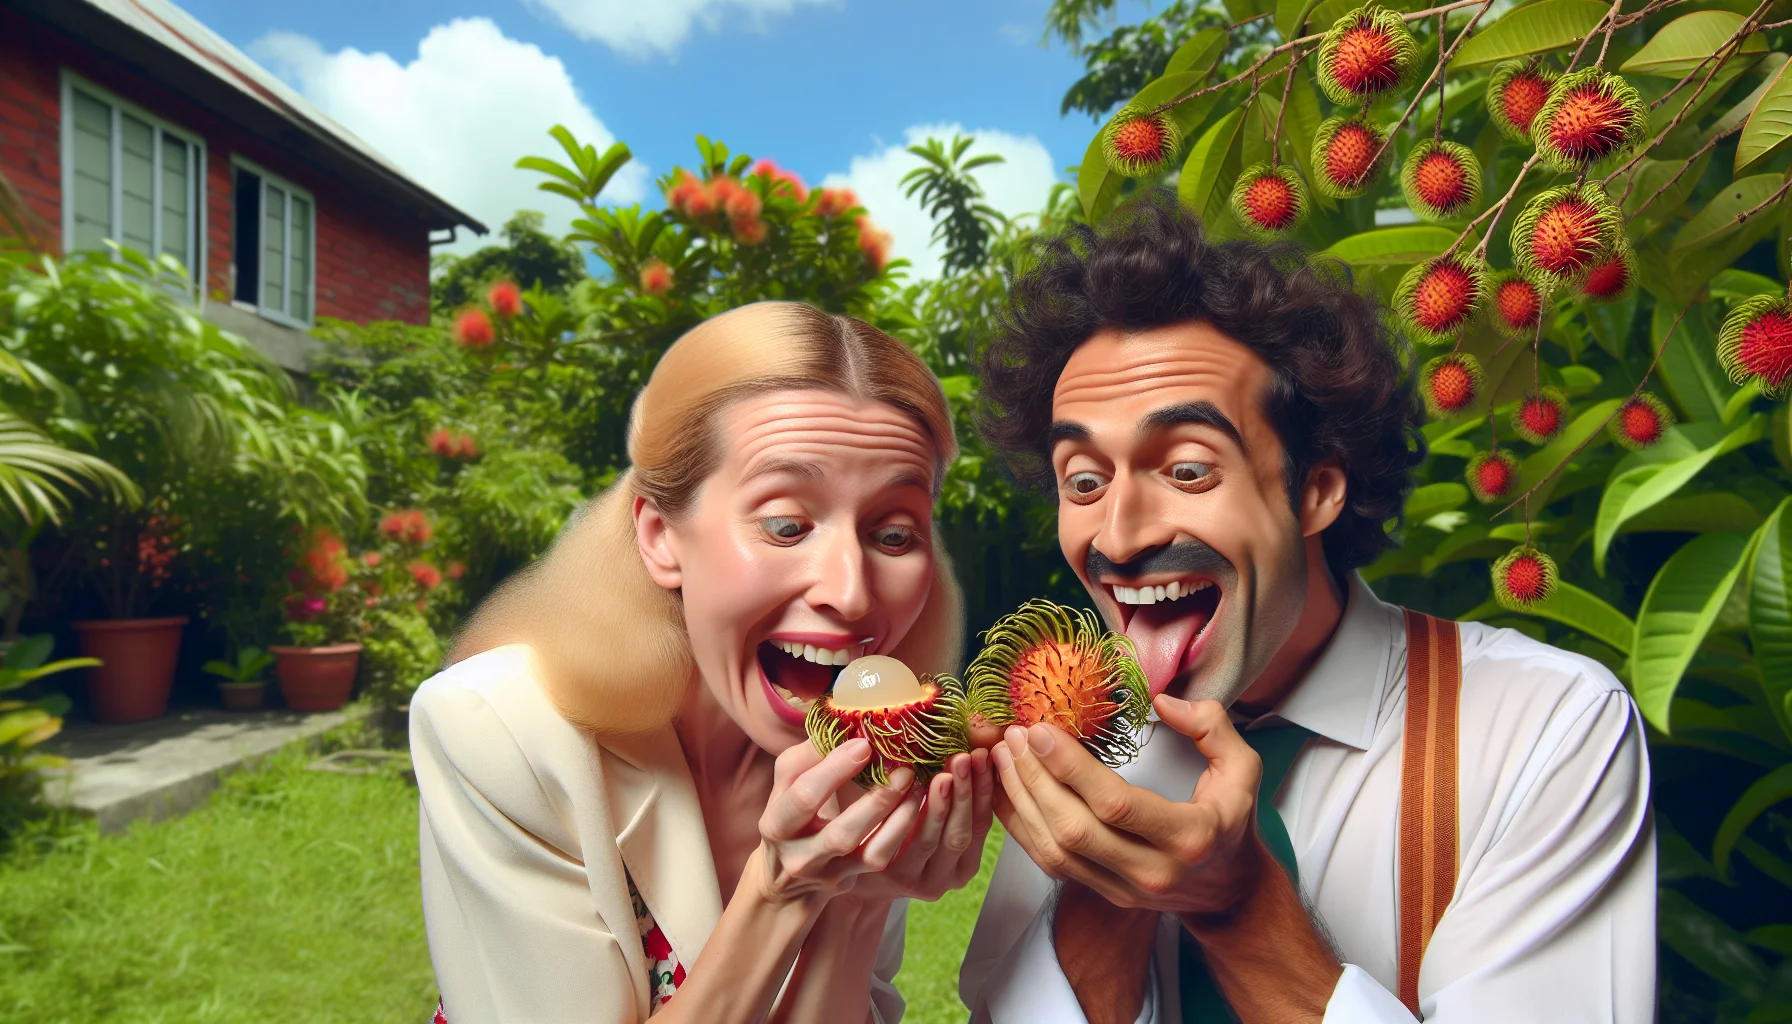 Generate a realistic image of a humorous scene involving the rambutan fruit. It's an idyllic day in a lush home garden, where two people of differing descents, one of Caucasian and the other of Middle-Eastern descent, are joyfully tasting the distinctively sweet and creamy rambutan fruit for the first time. They are captured in a comical moment of surprise and delight at the exotic flavor. Visually surrounding them are blooming rambutan trees bearing the distinctive fruits, enticing the viewer to enjoy the joys of home gardening and fruit cultivation. 